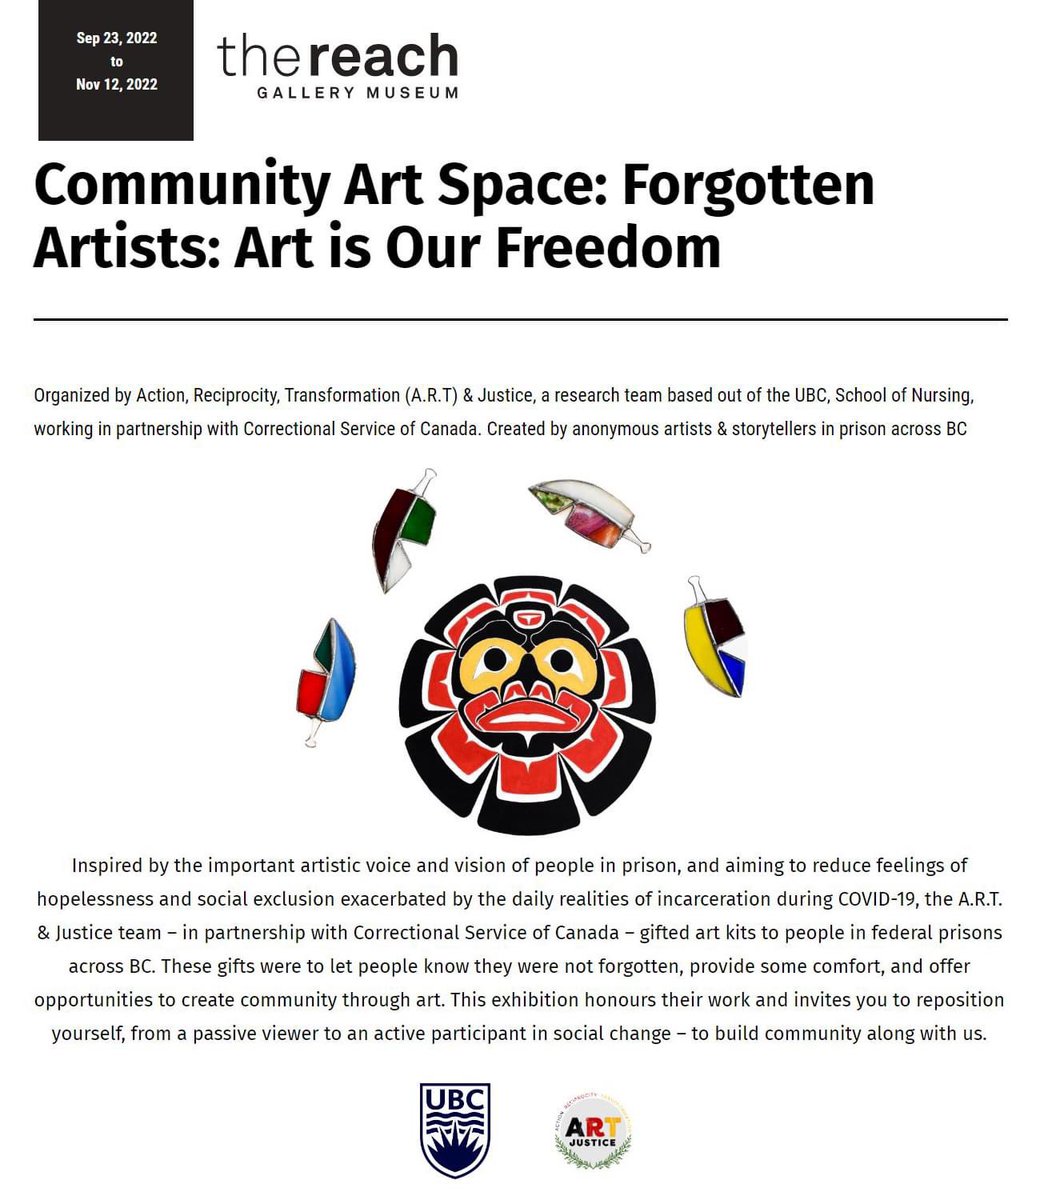 ART+ Justice's next show is at the Reach Gallery Museum in Abbotsford from Sept 23-Nov 12. Come visit and share! @TheReach 
thereach.ca/exhibition/com…

#indigenousart #incarceratedartists #MentalHealthAwareness #art #BCartists #transformativejustice